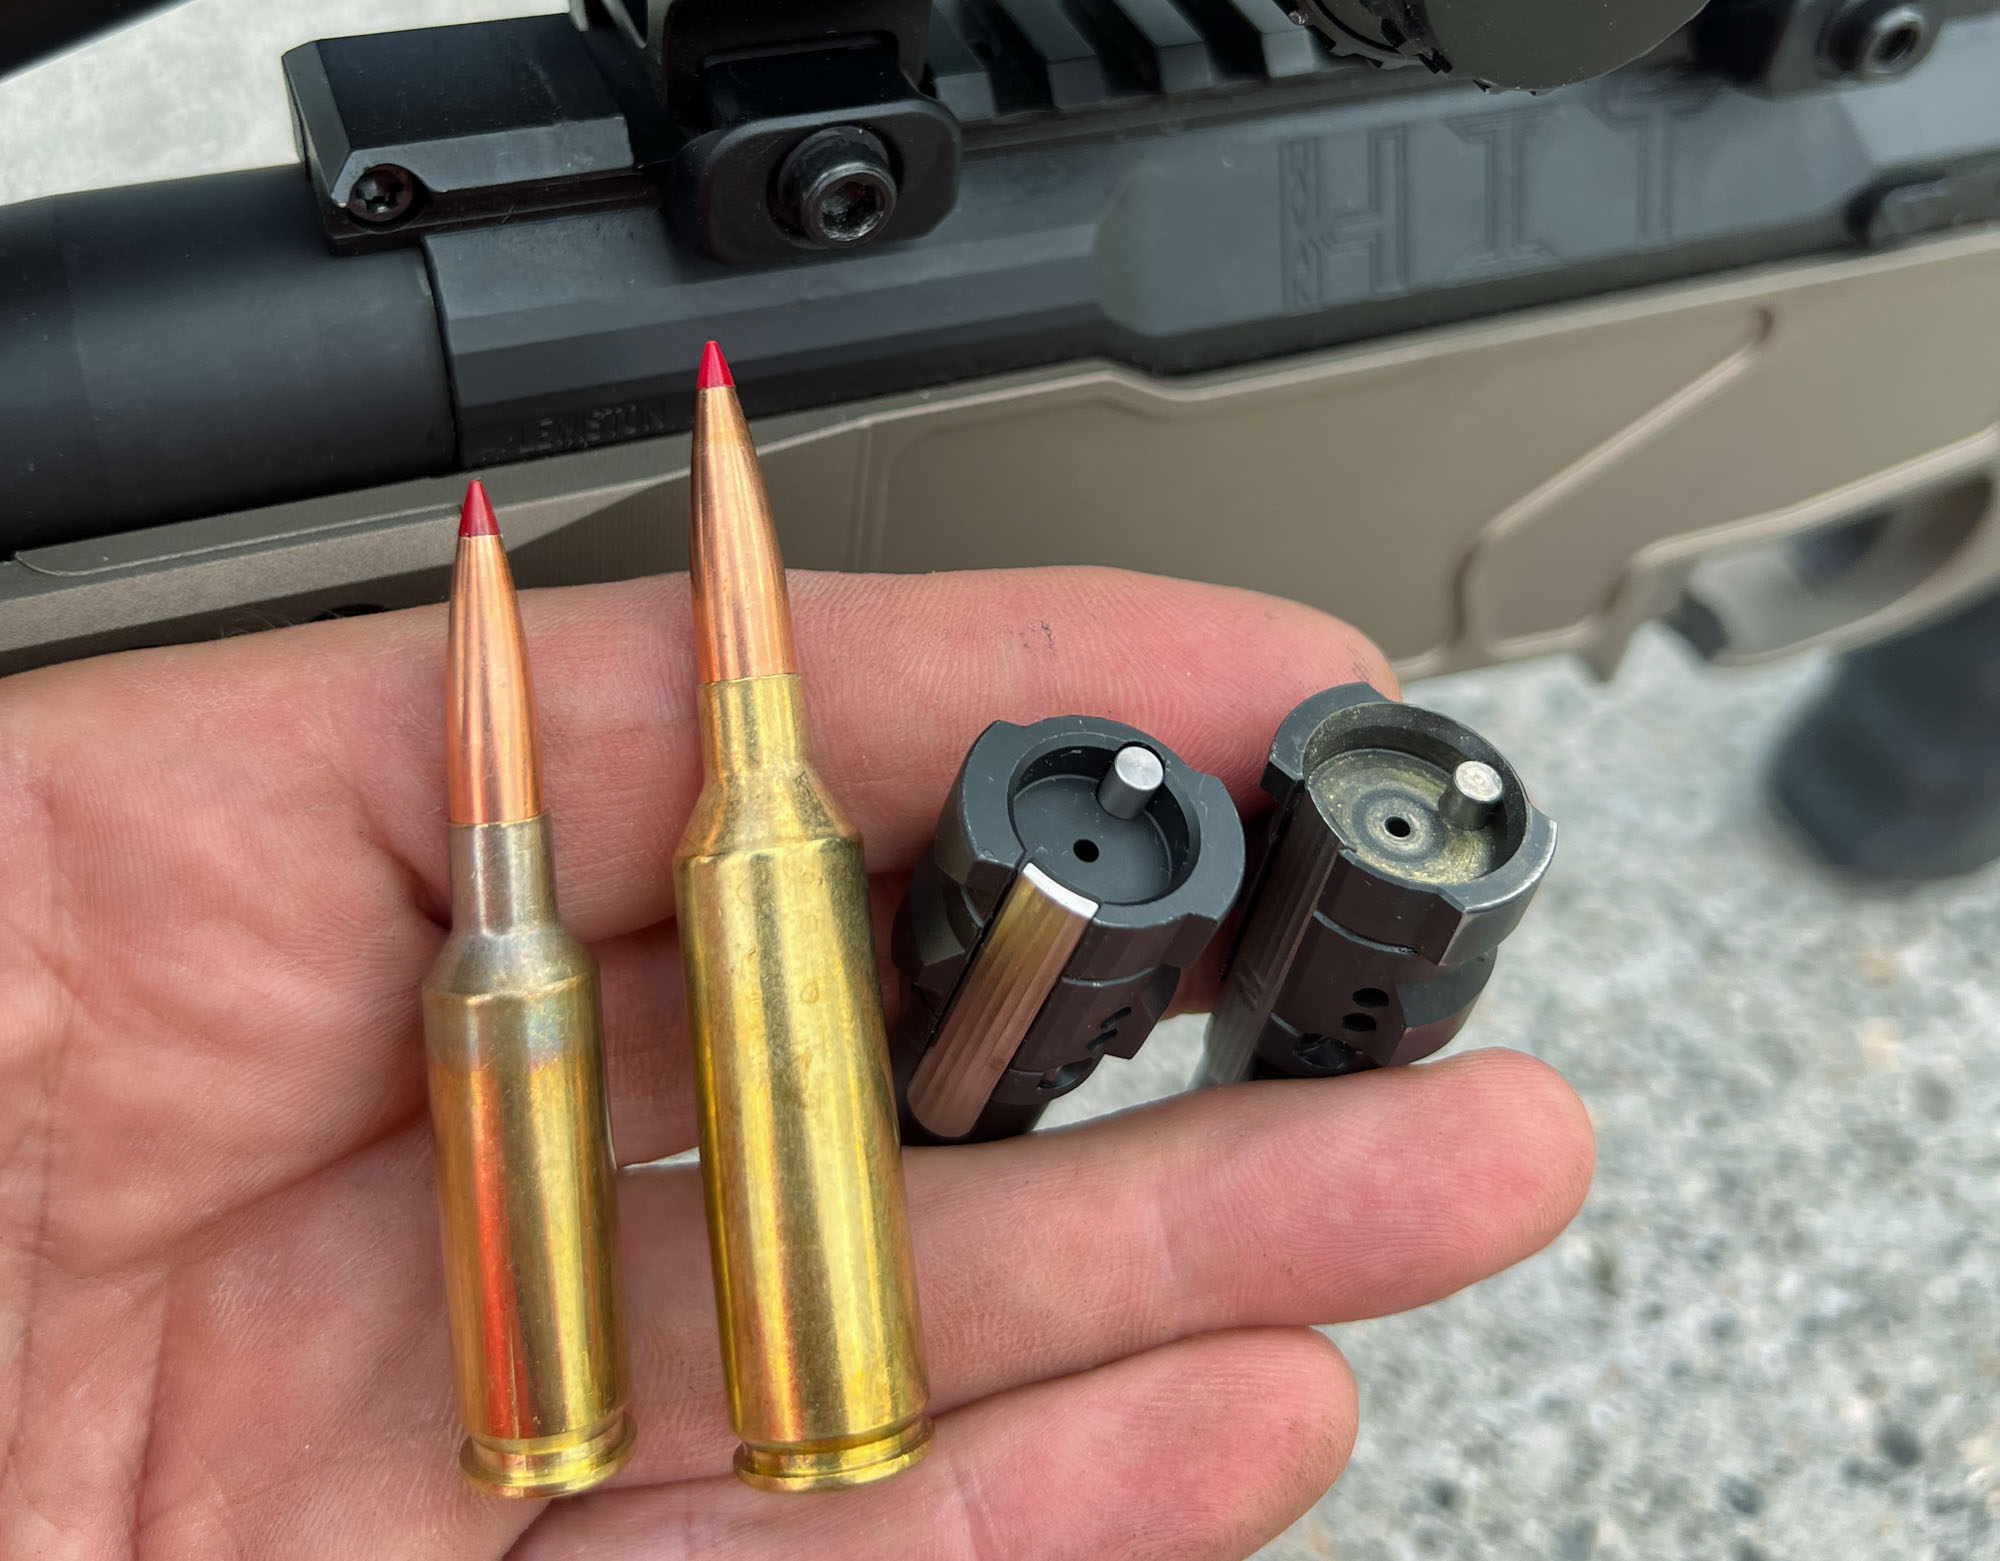 Bolt heads and cartridges in hand